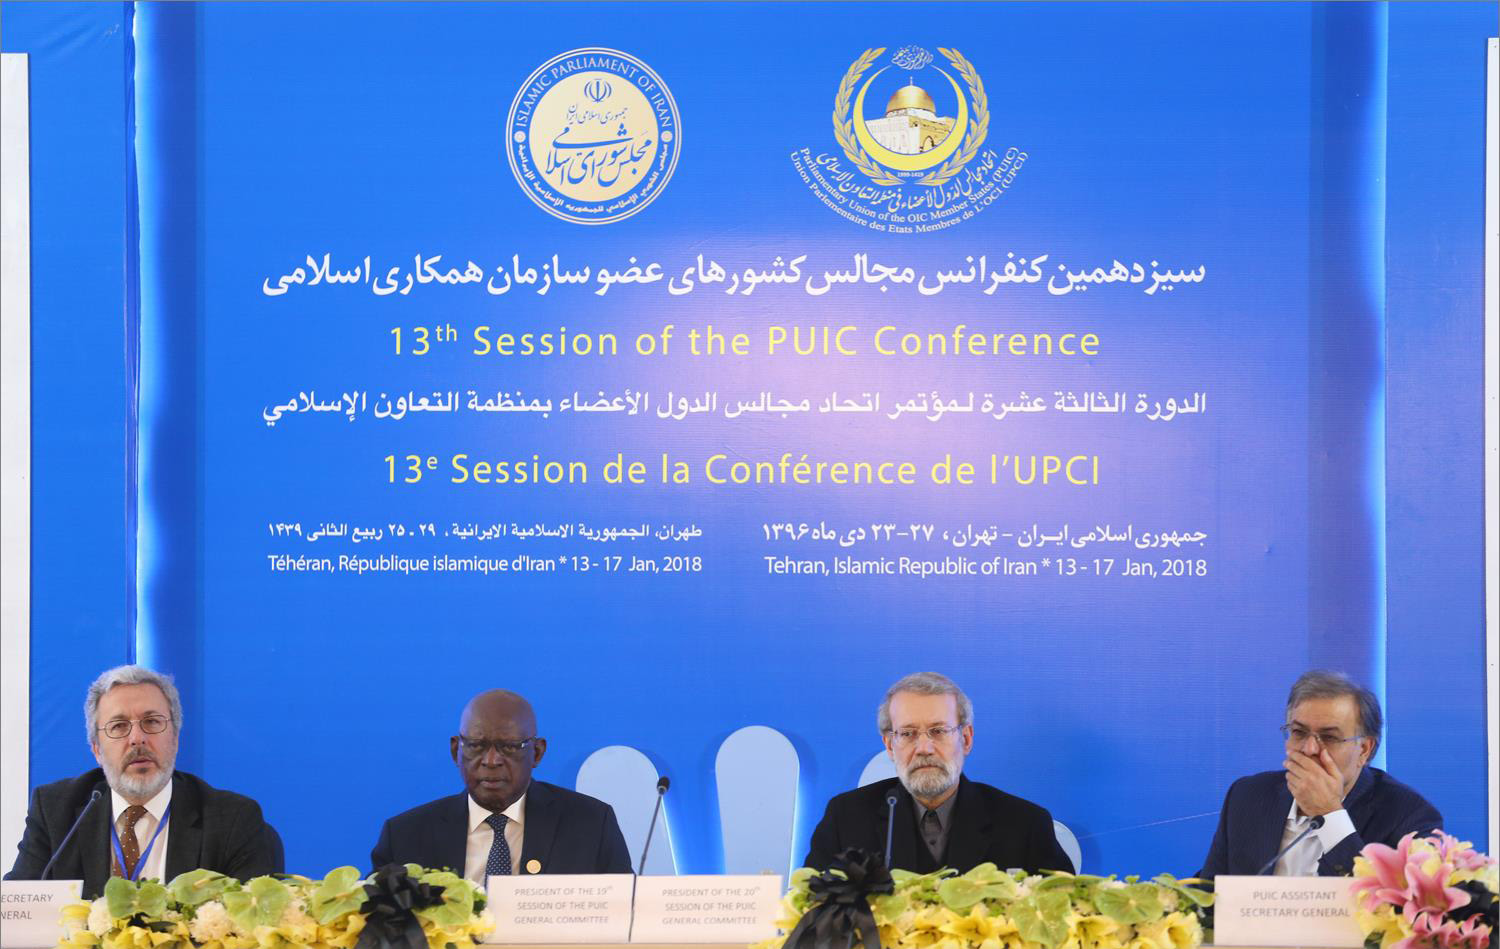 20th Session of the PUIC General Committee, 15 January 2018